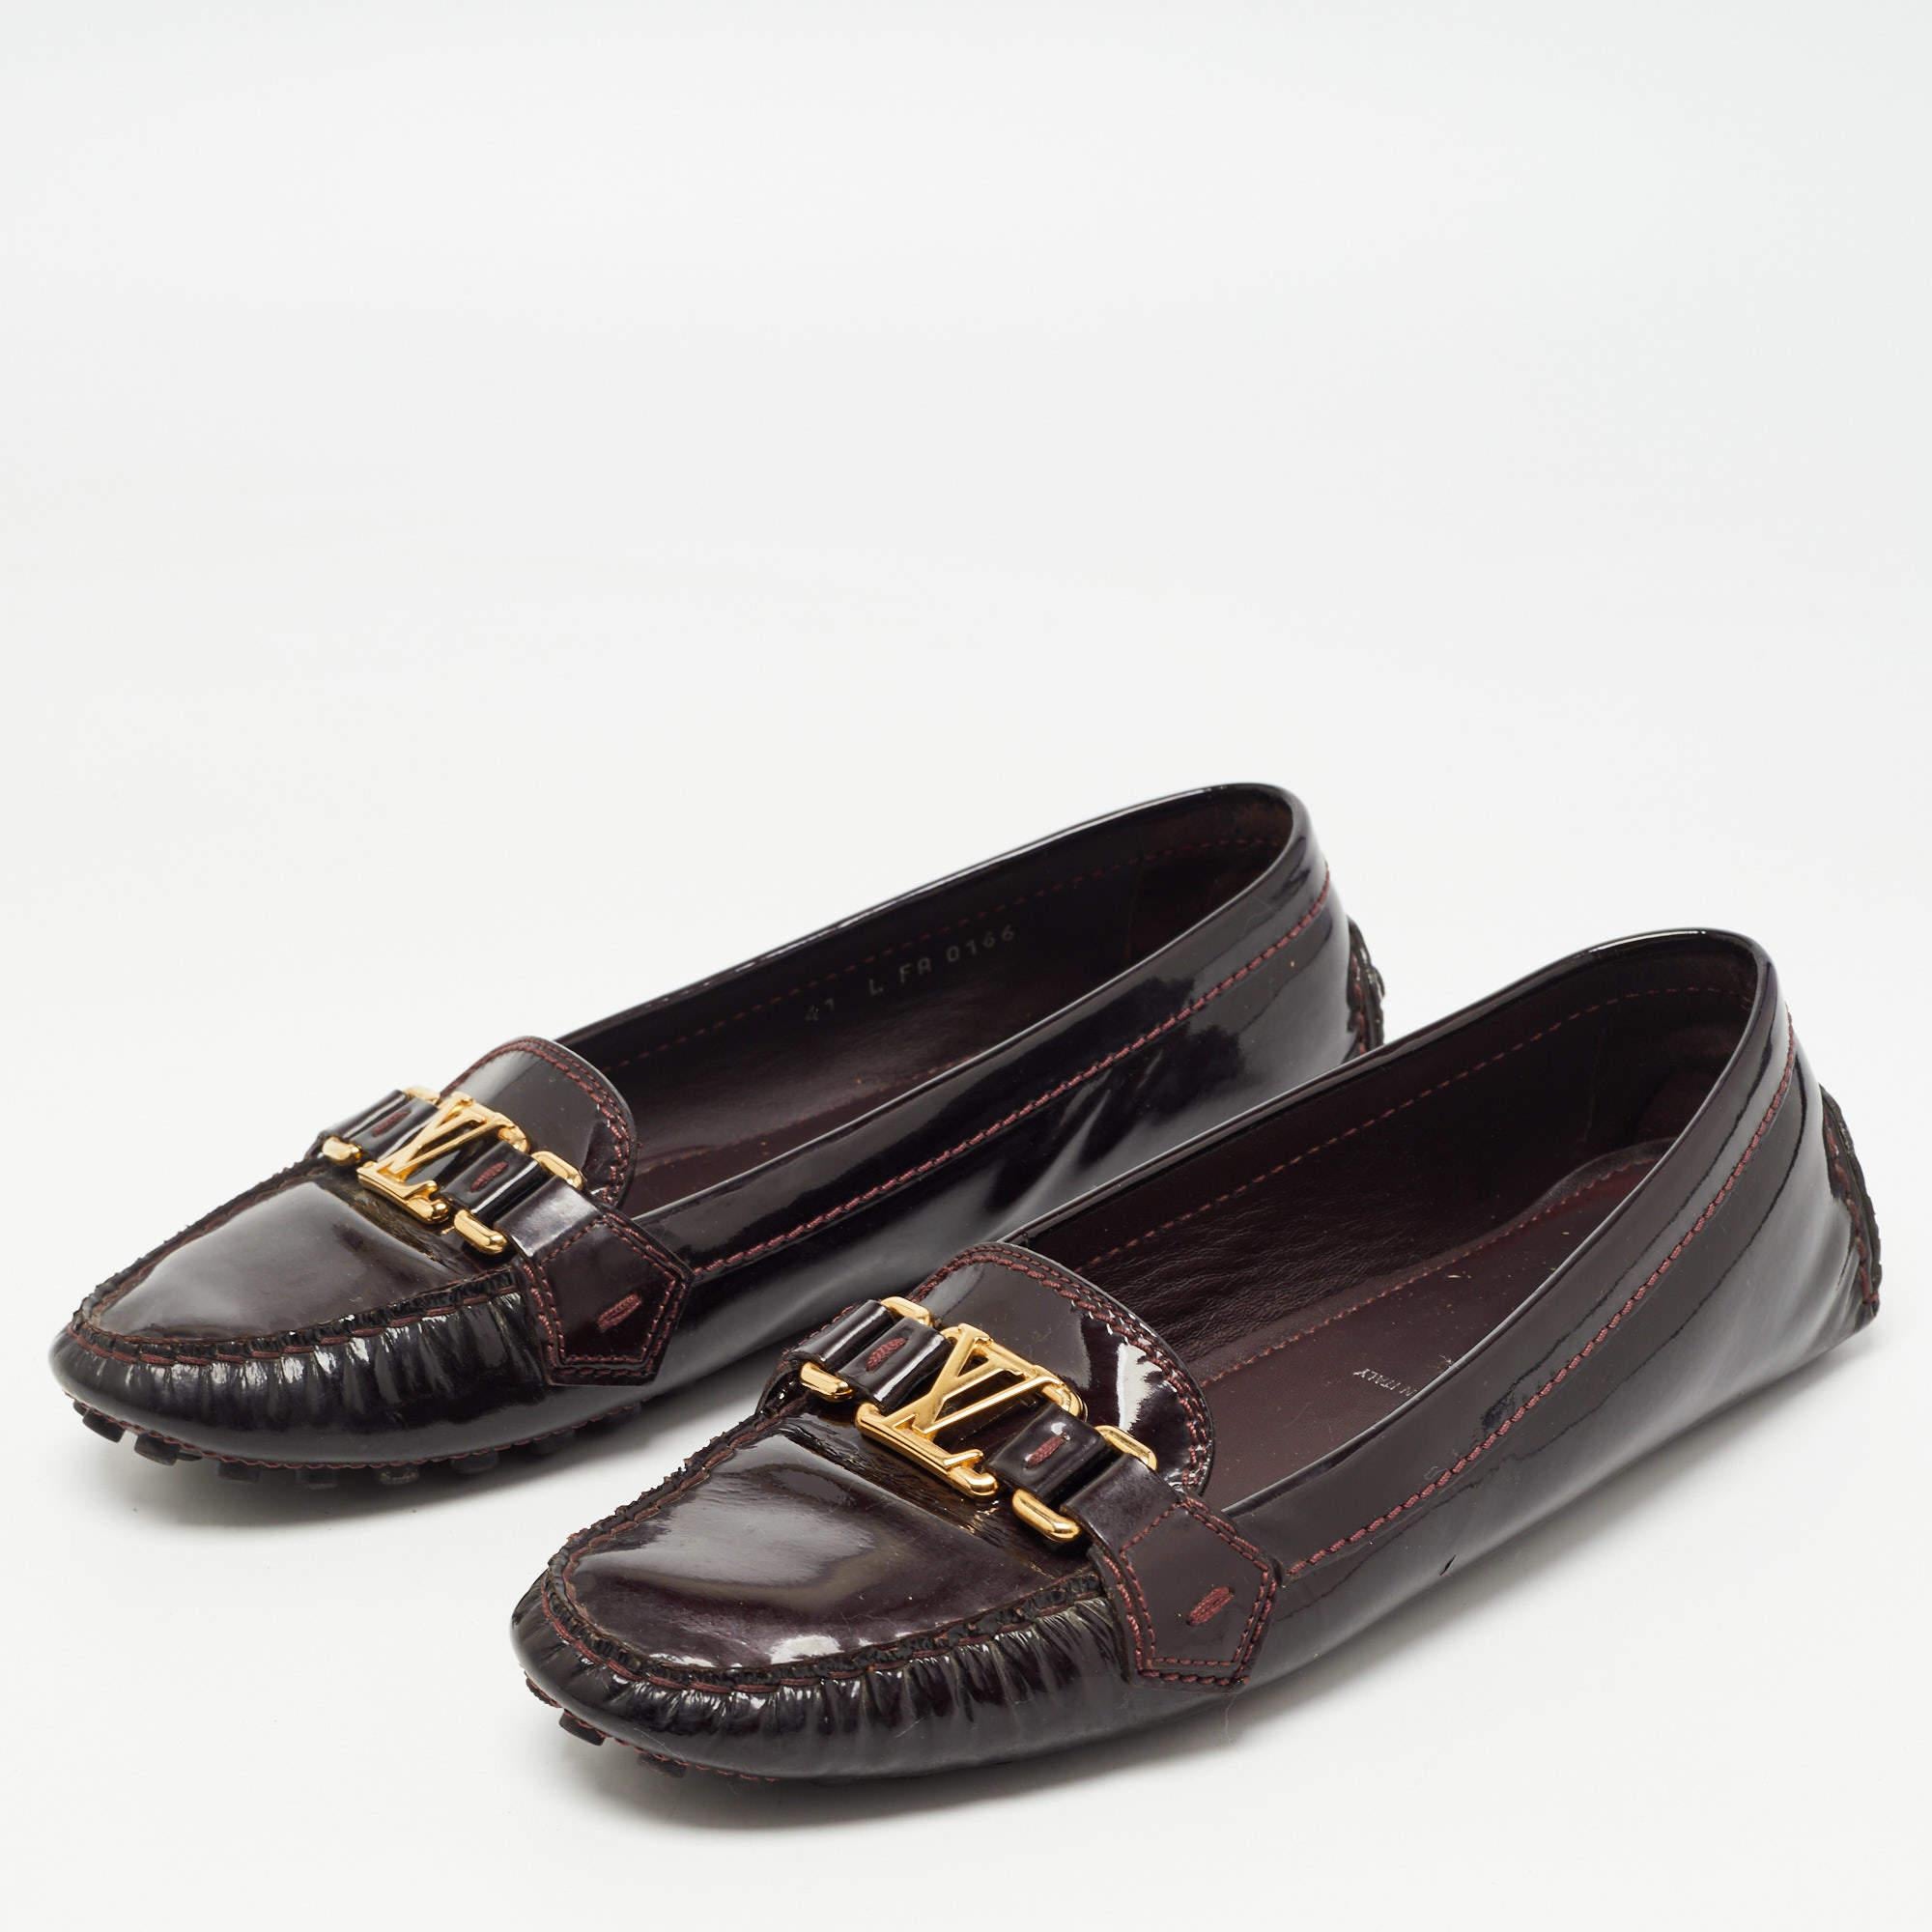 Louis Vuitton Burgundy Patent Leather Oxford Slip On Loafers Size 41 2